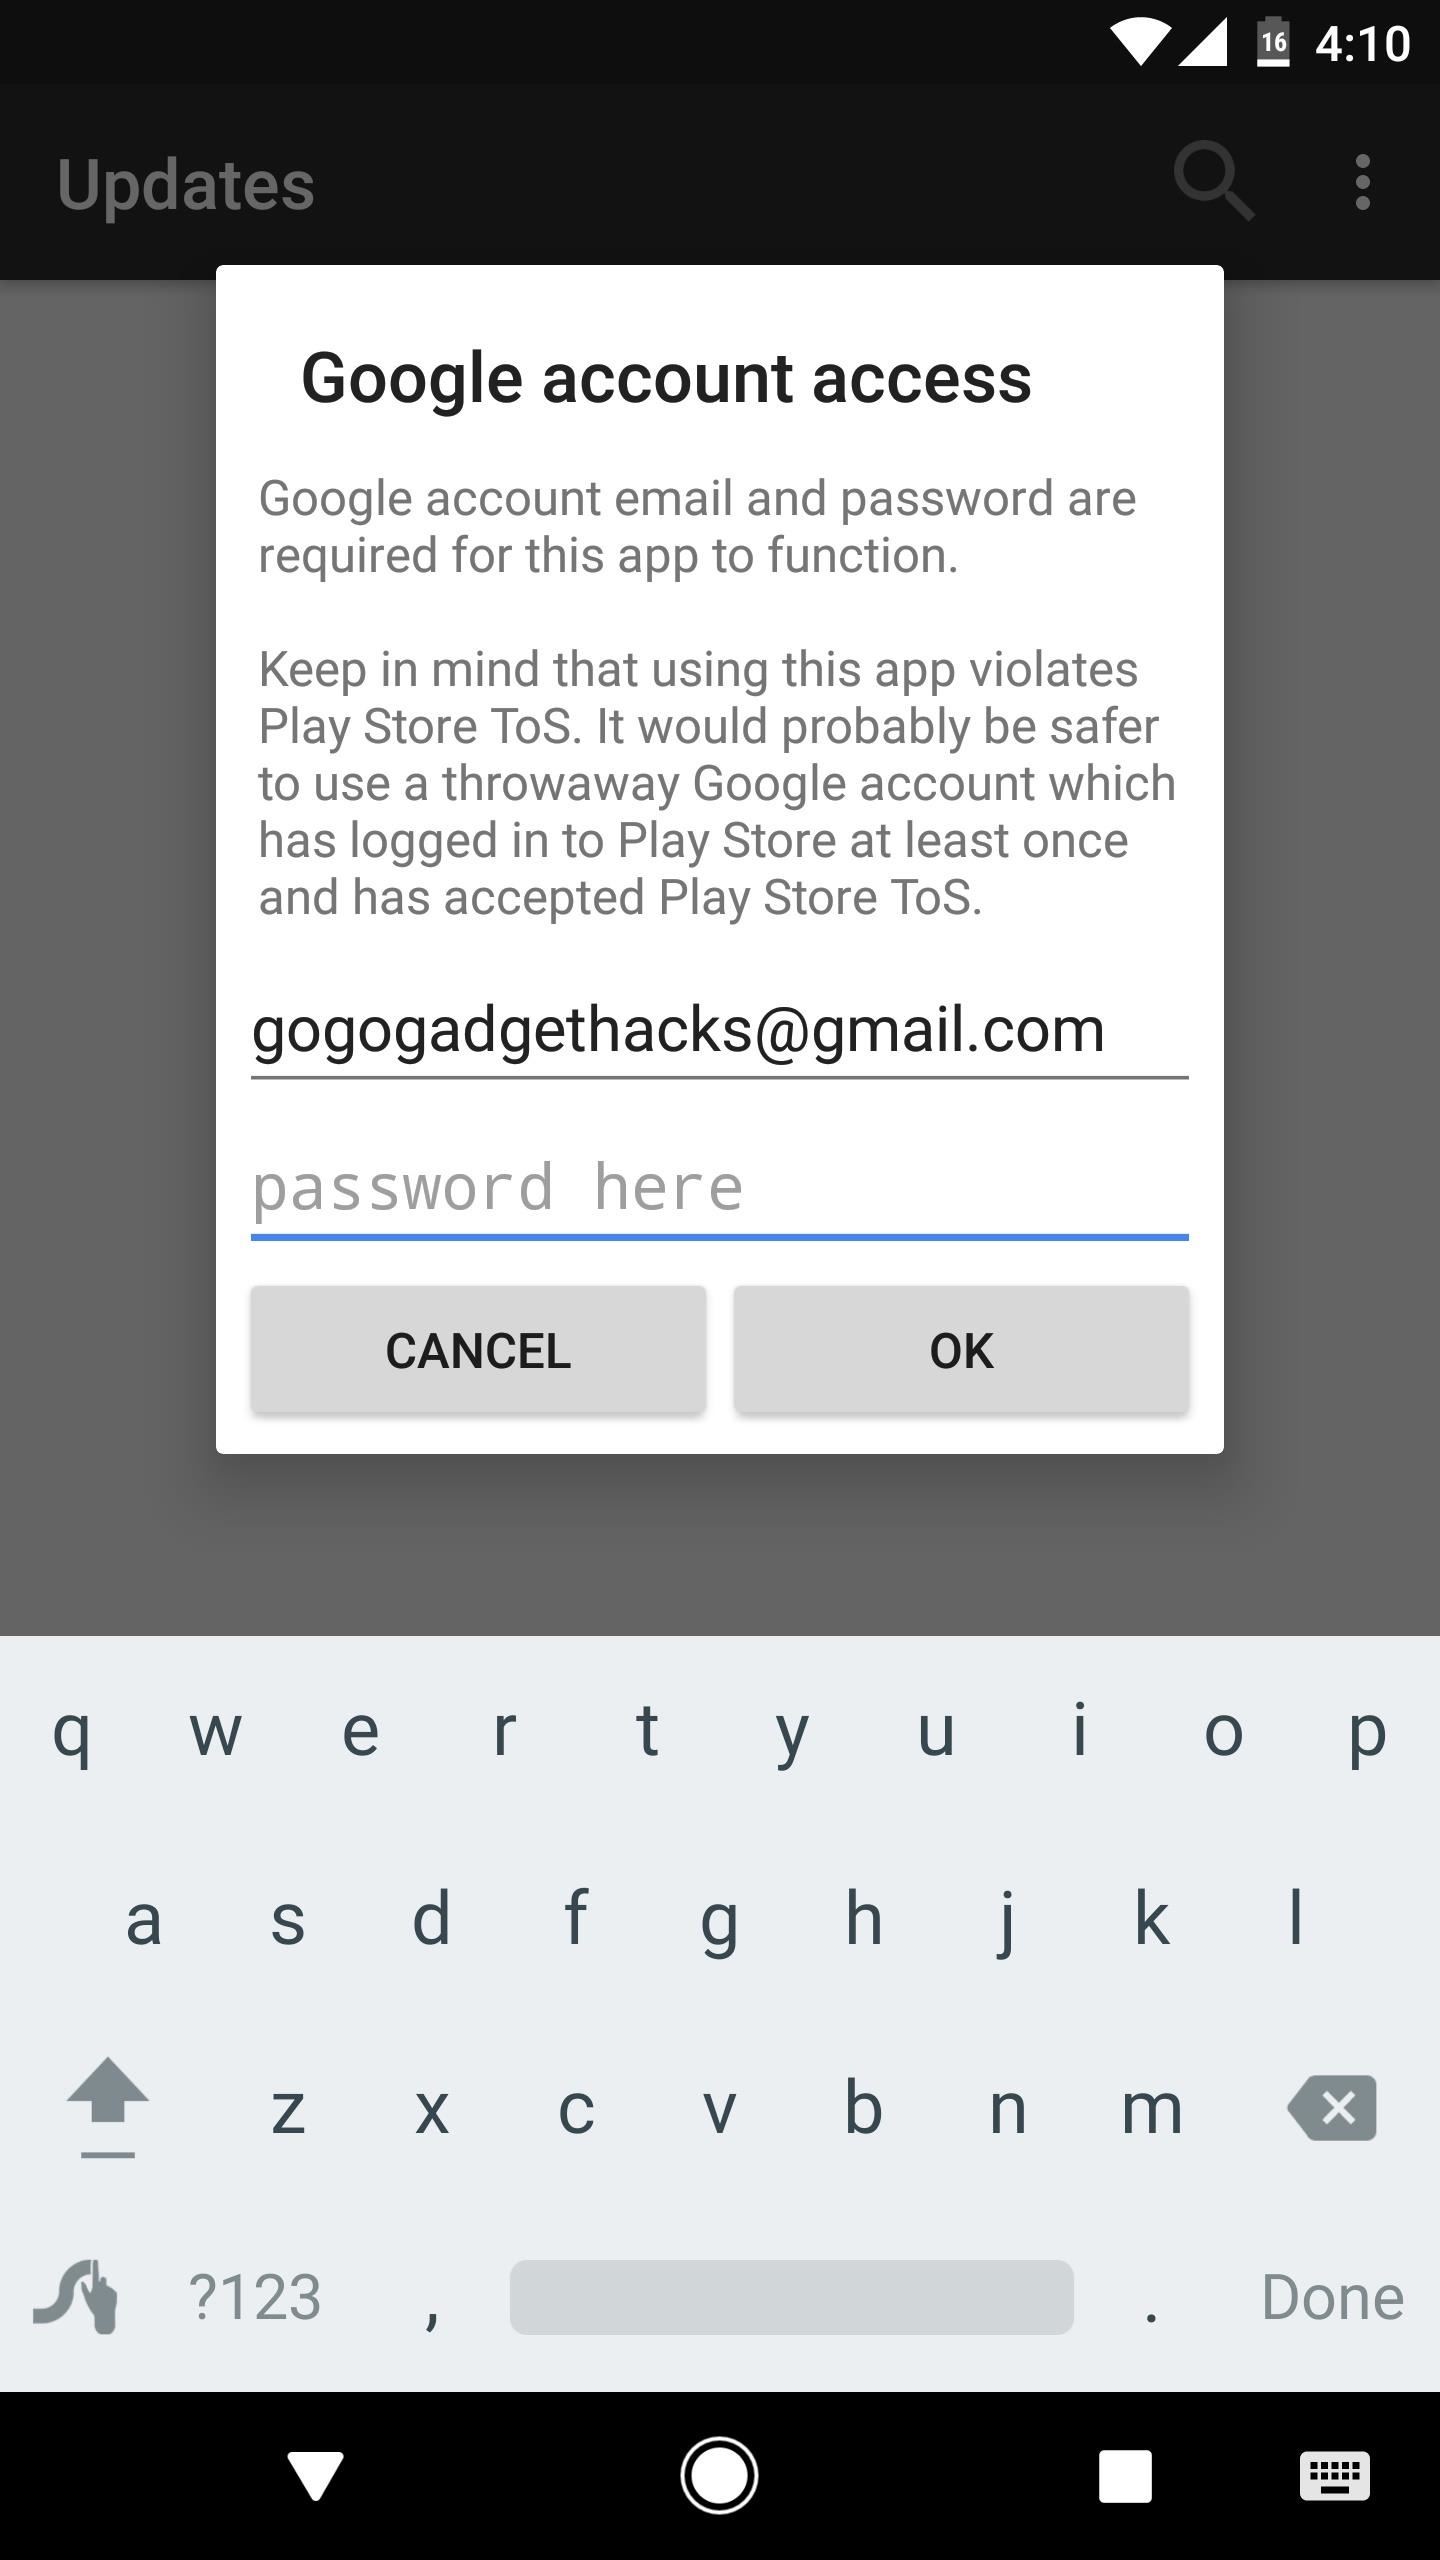 How to Install Apps from the Play Store Without Gapps or Google Services